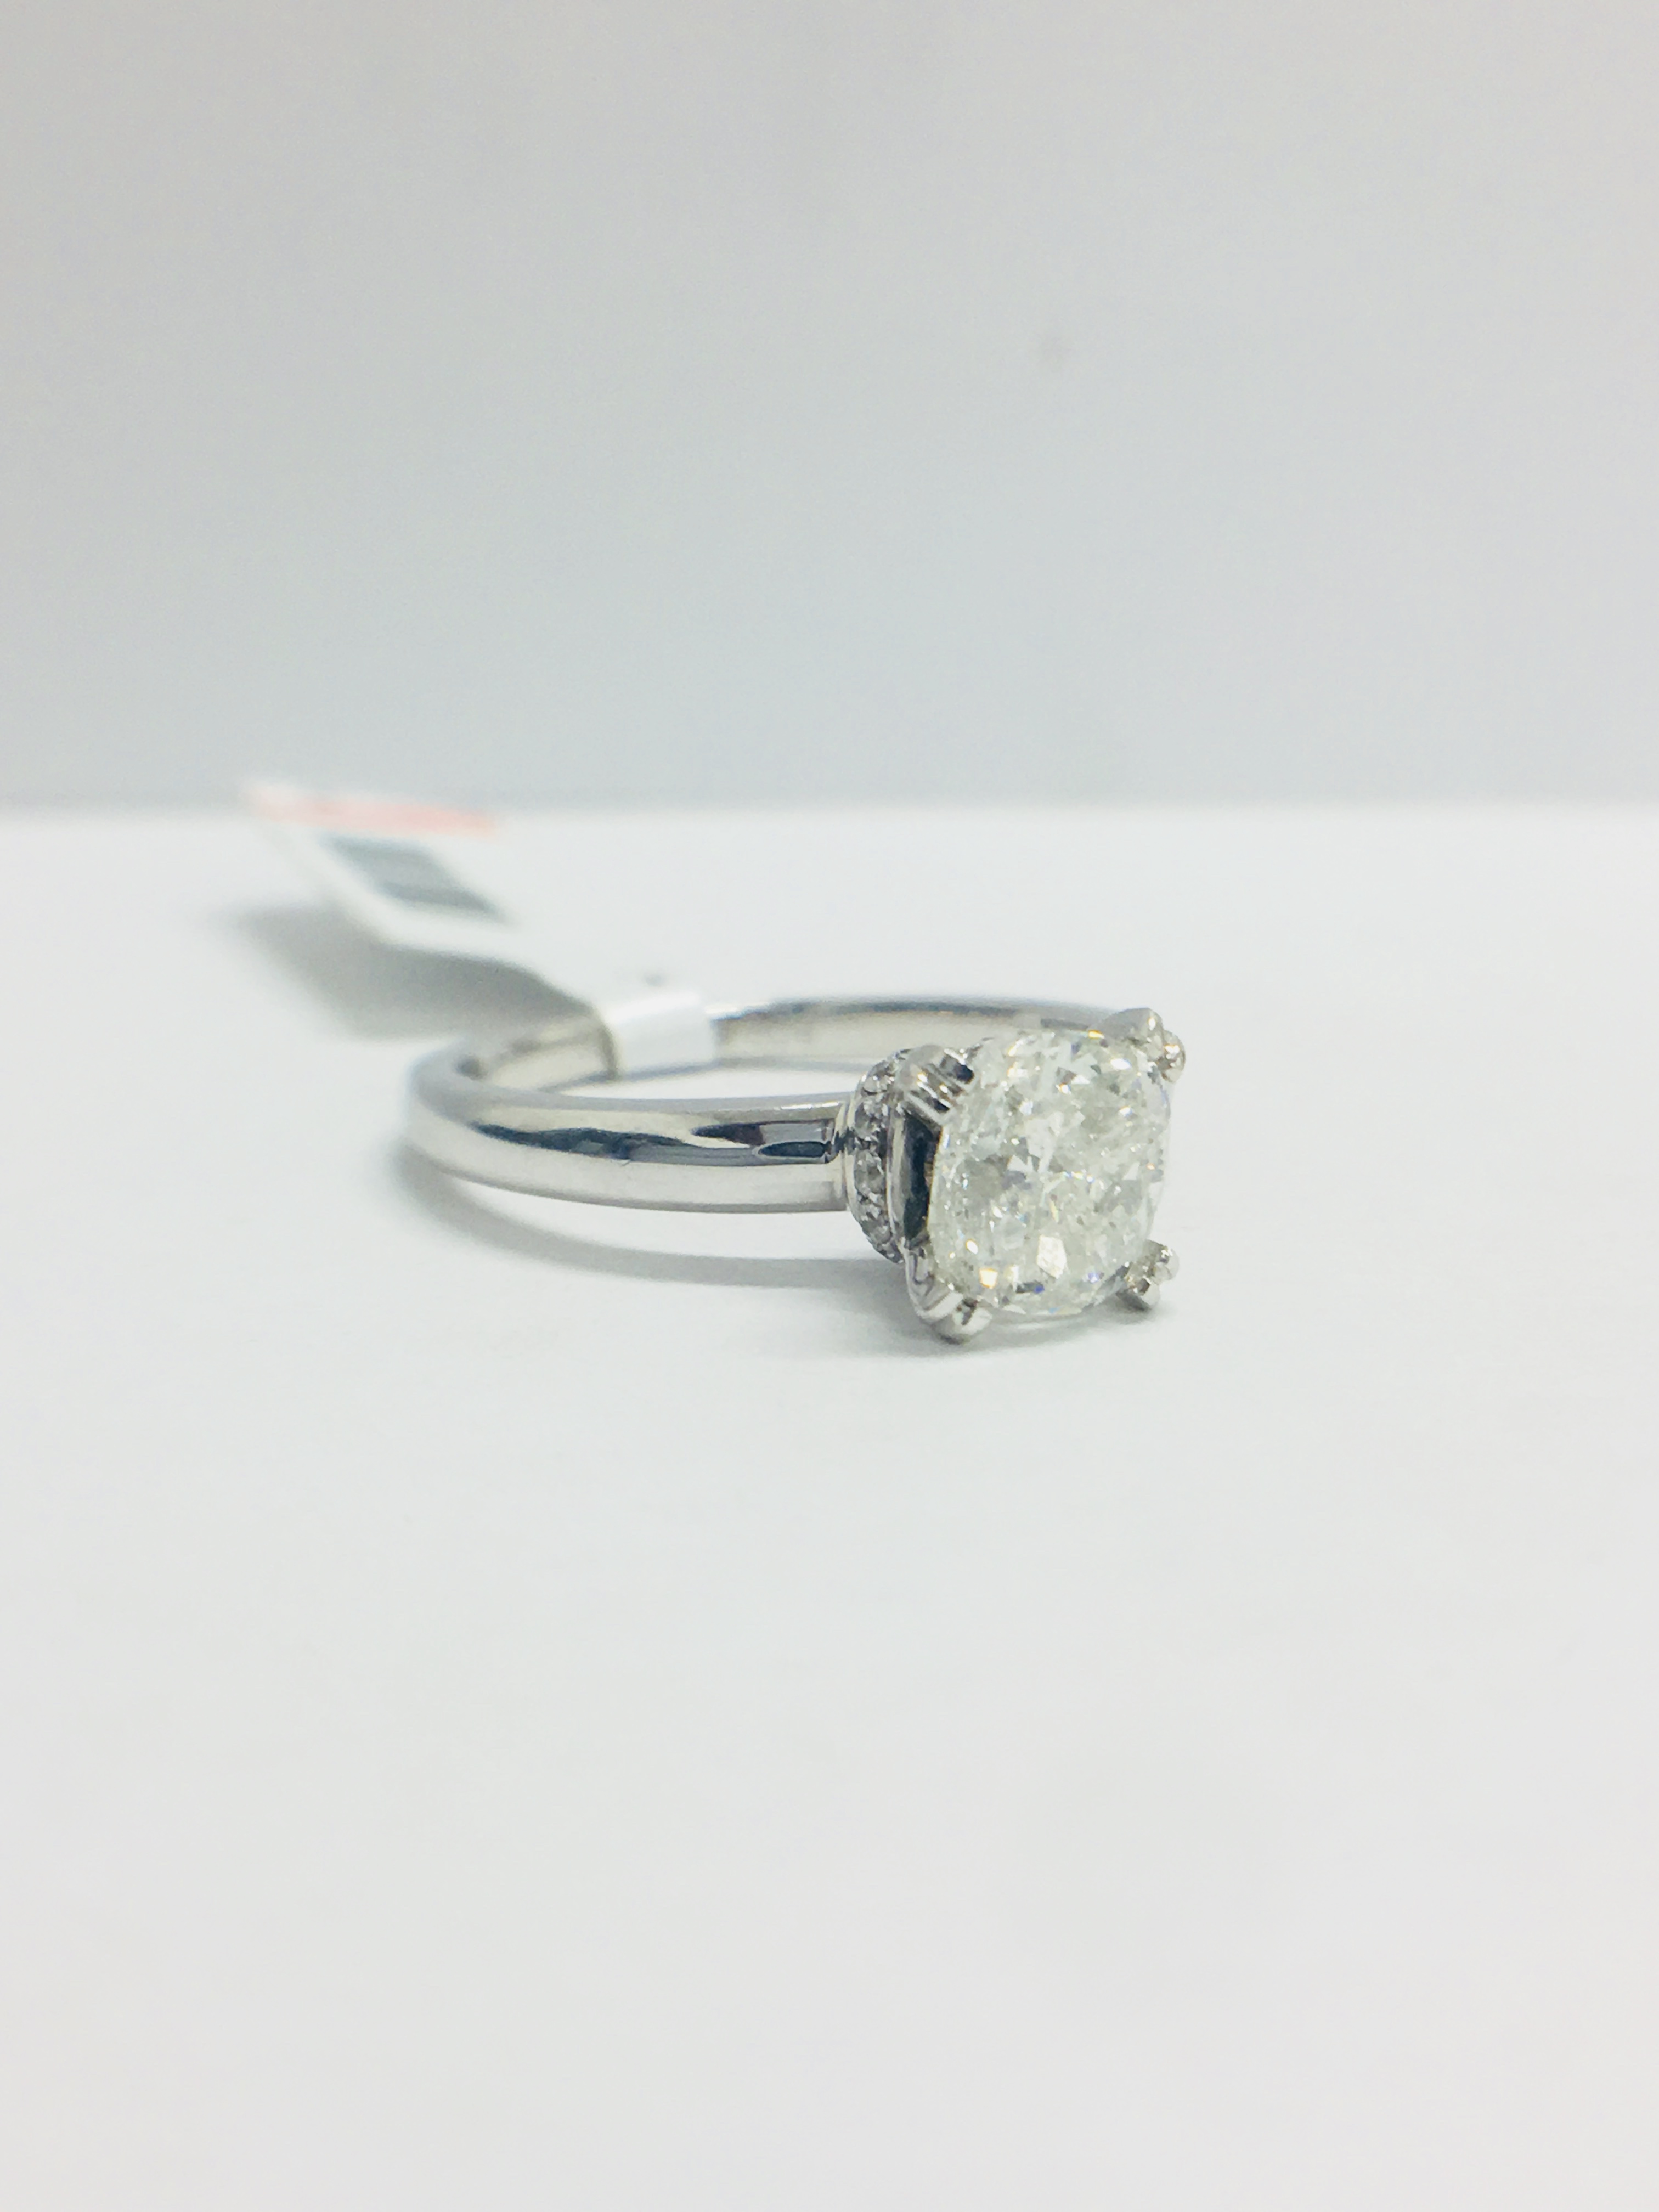 1Ct Cushion Cut Diamond Solitaire Ring In A Diamond Set Mount, - Image 10 of 11